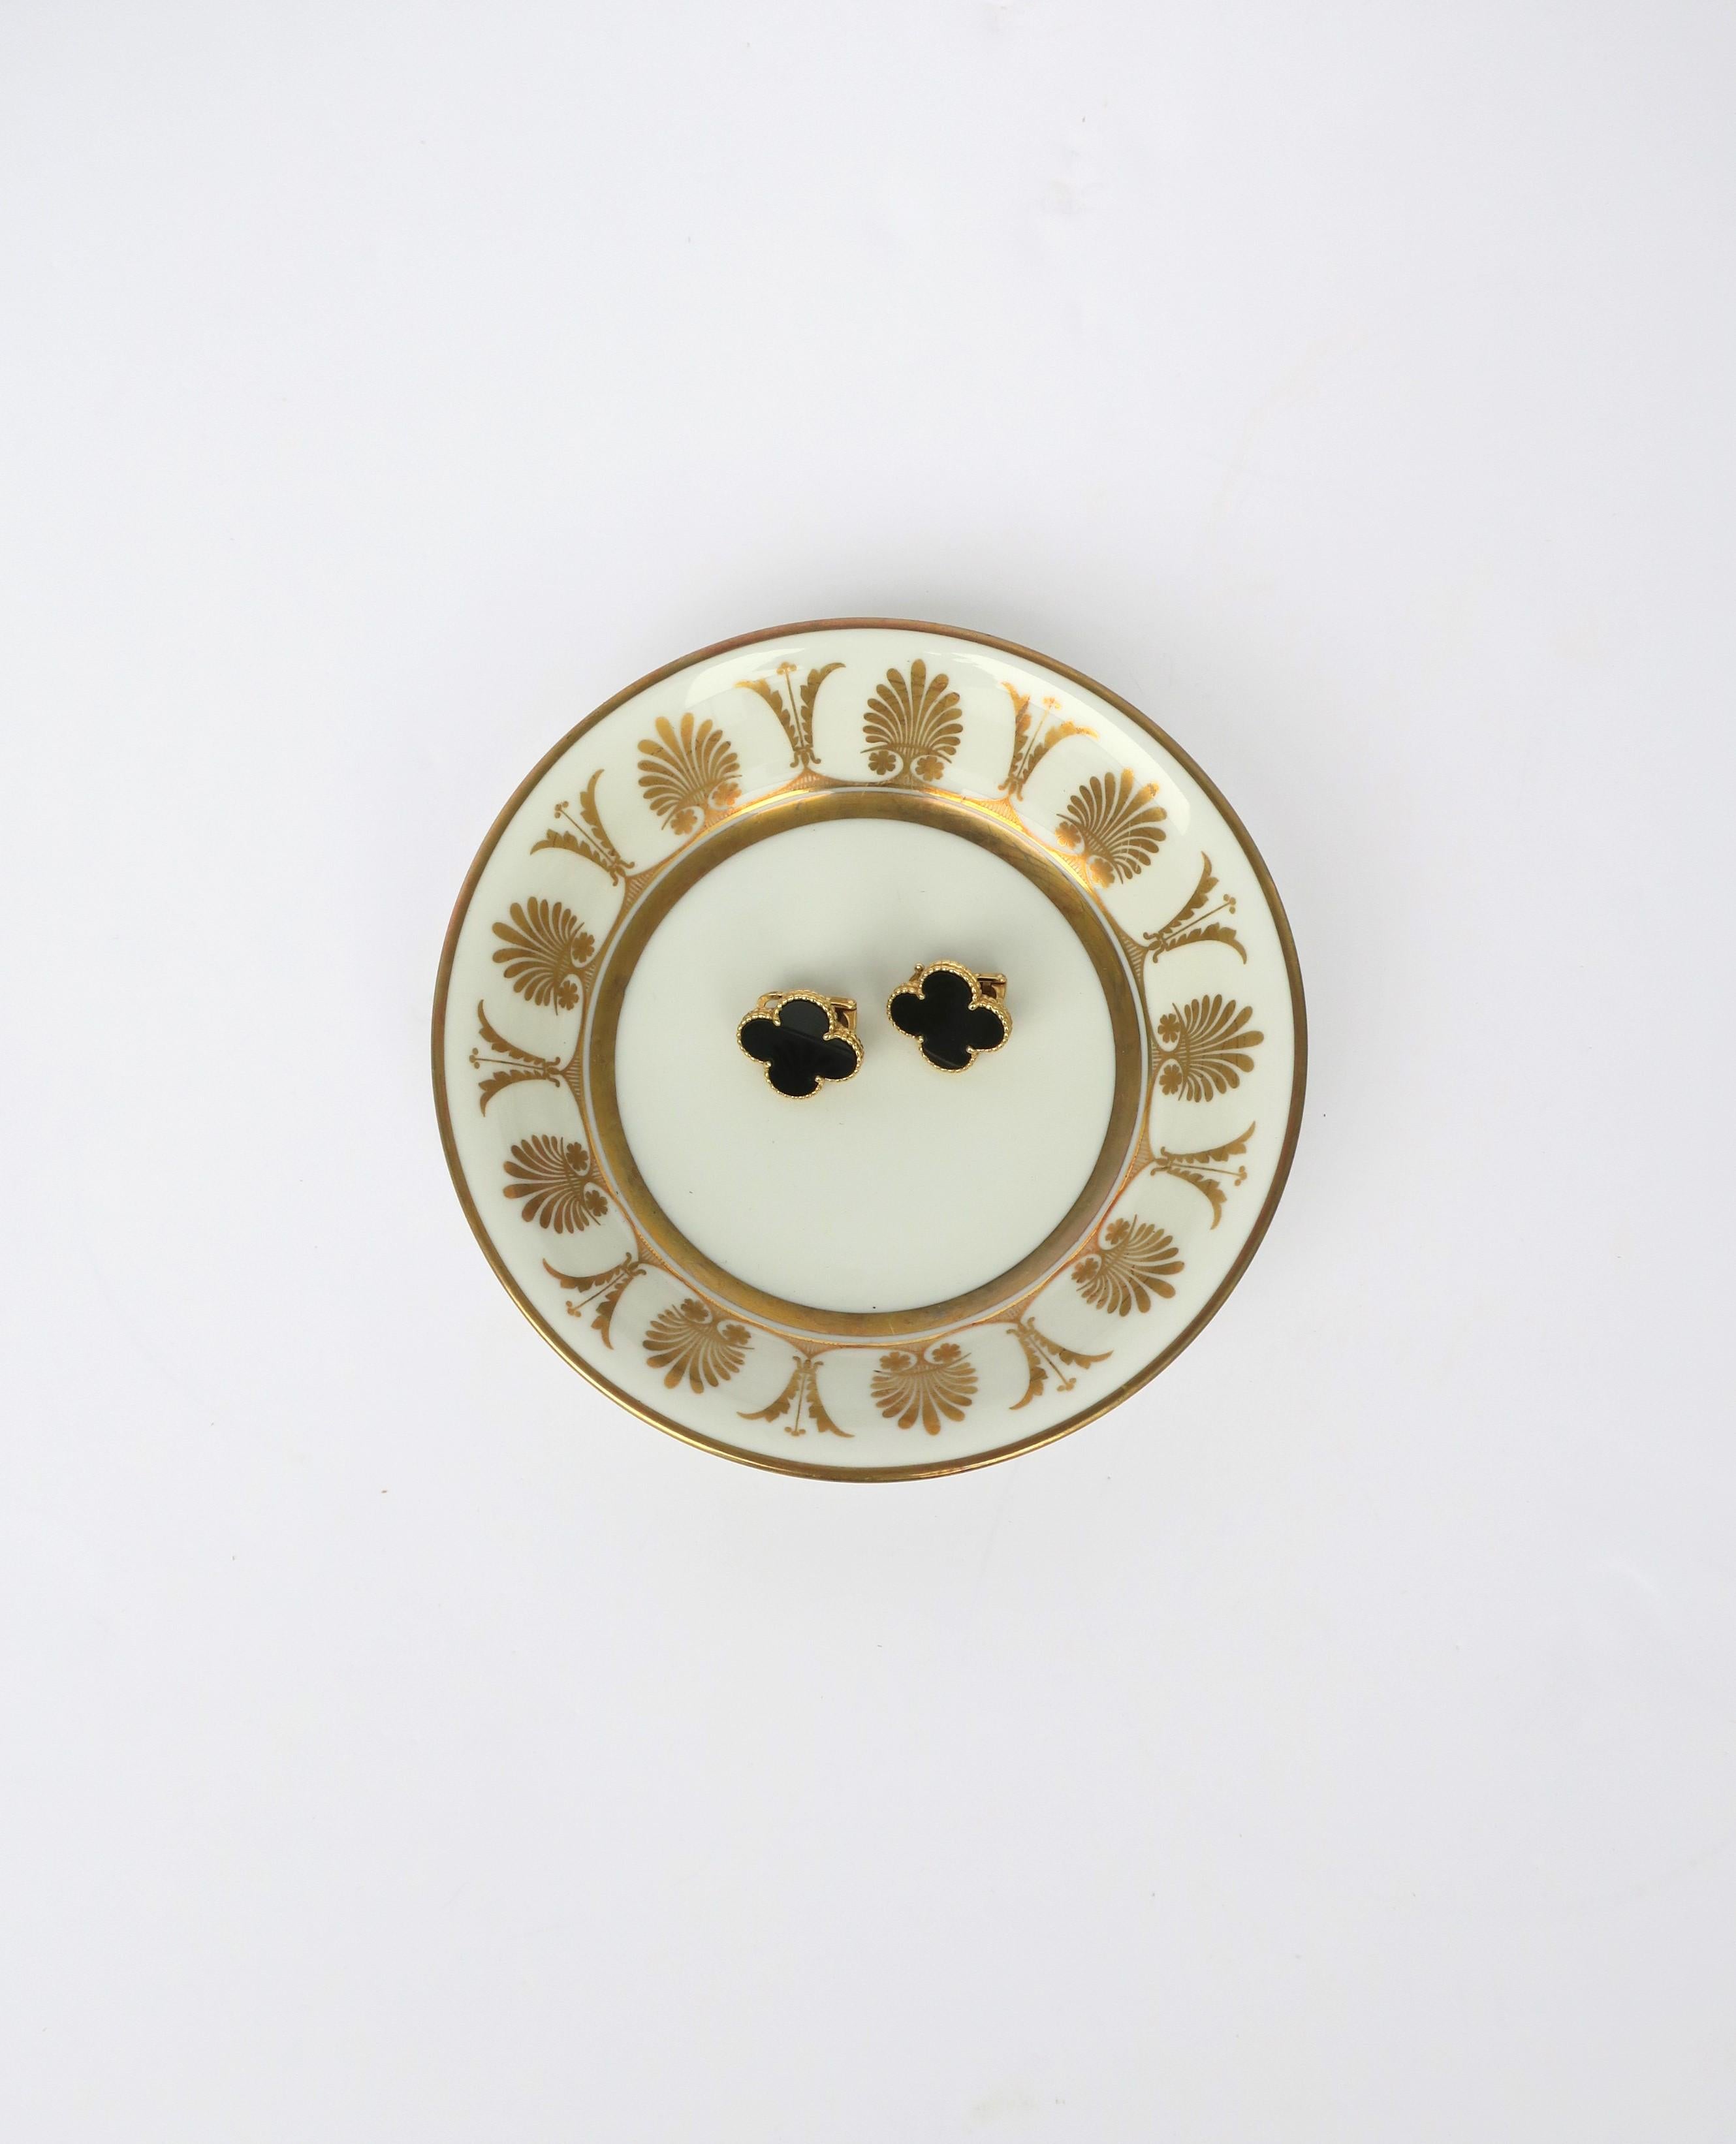 Vintage Italian Richard Ginori Porcelain Jewelry Dish, circa 1960s In Good Condition For Sale In New York, NY